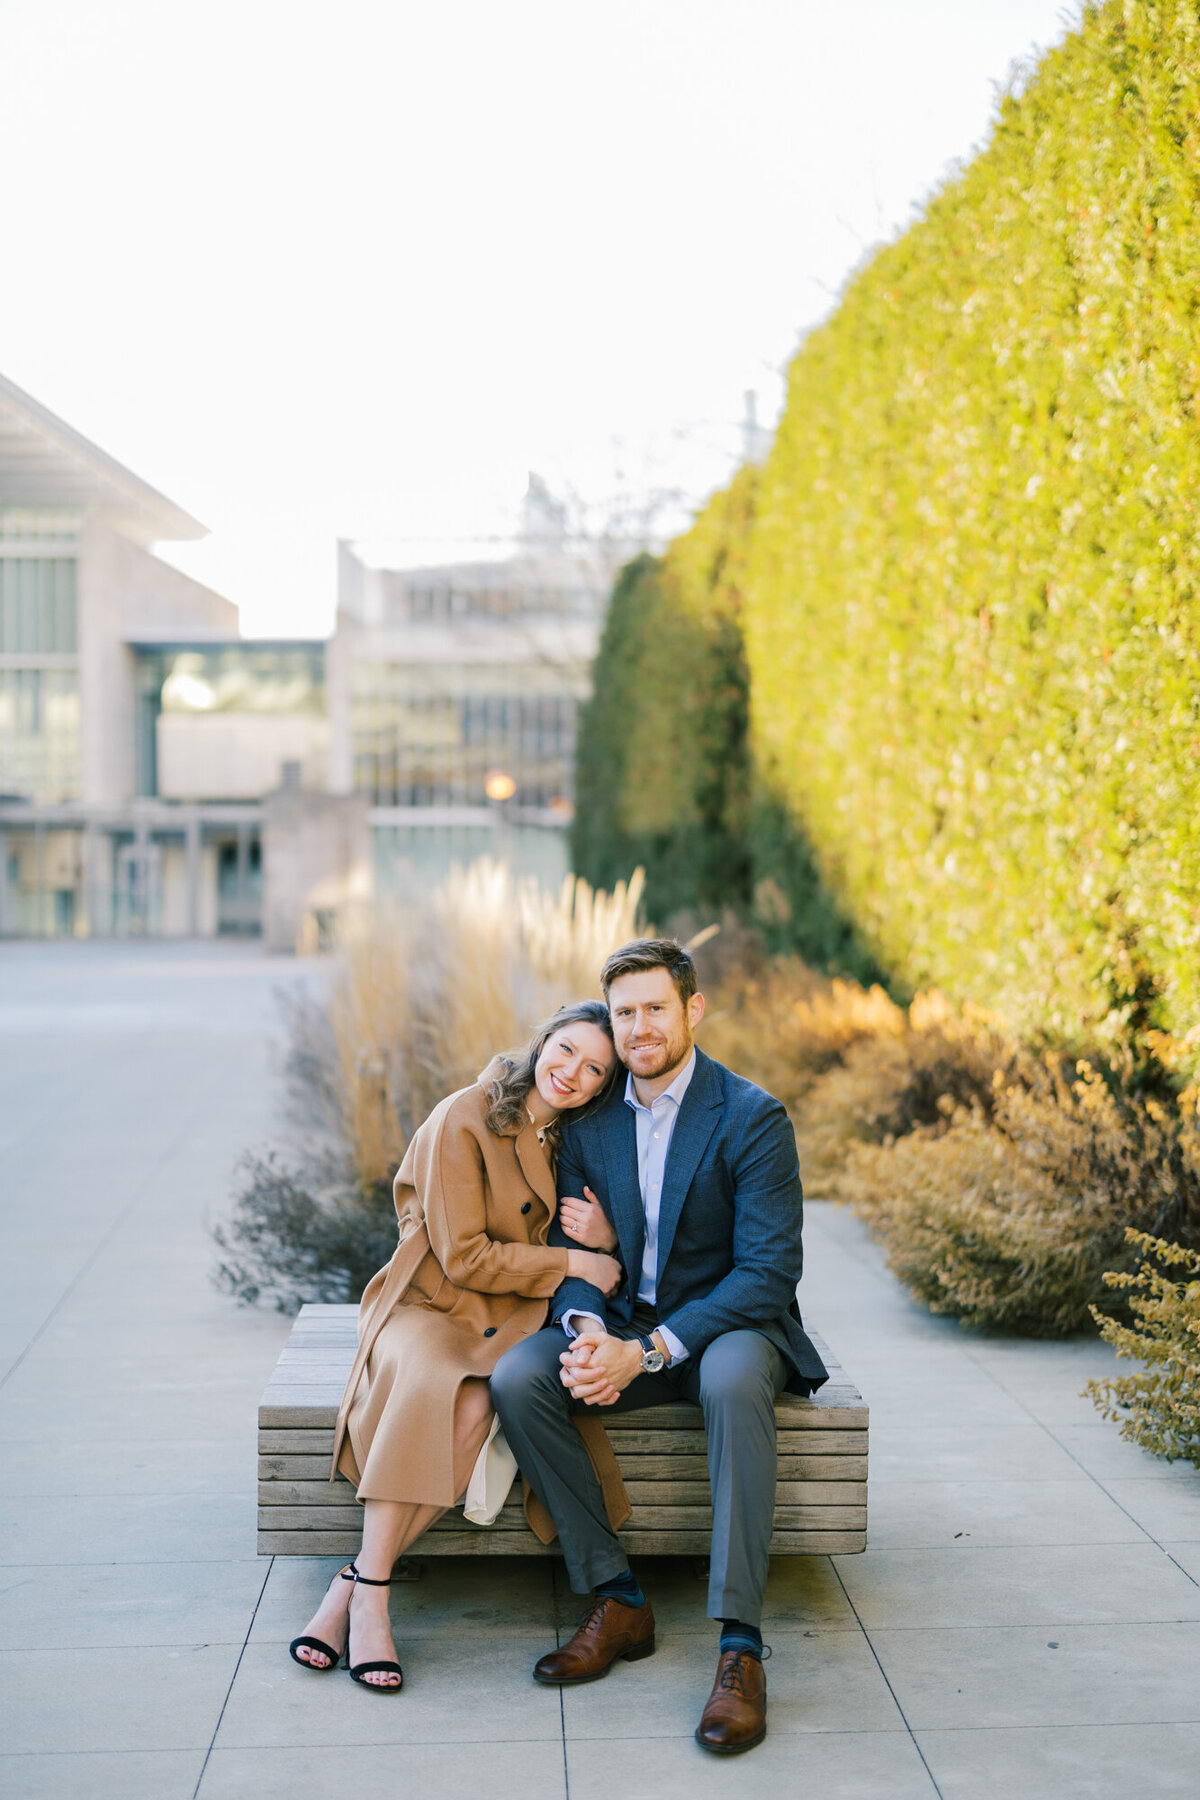 A beautiful engagement portrait taken in Lurie Garden in downtown Chicago